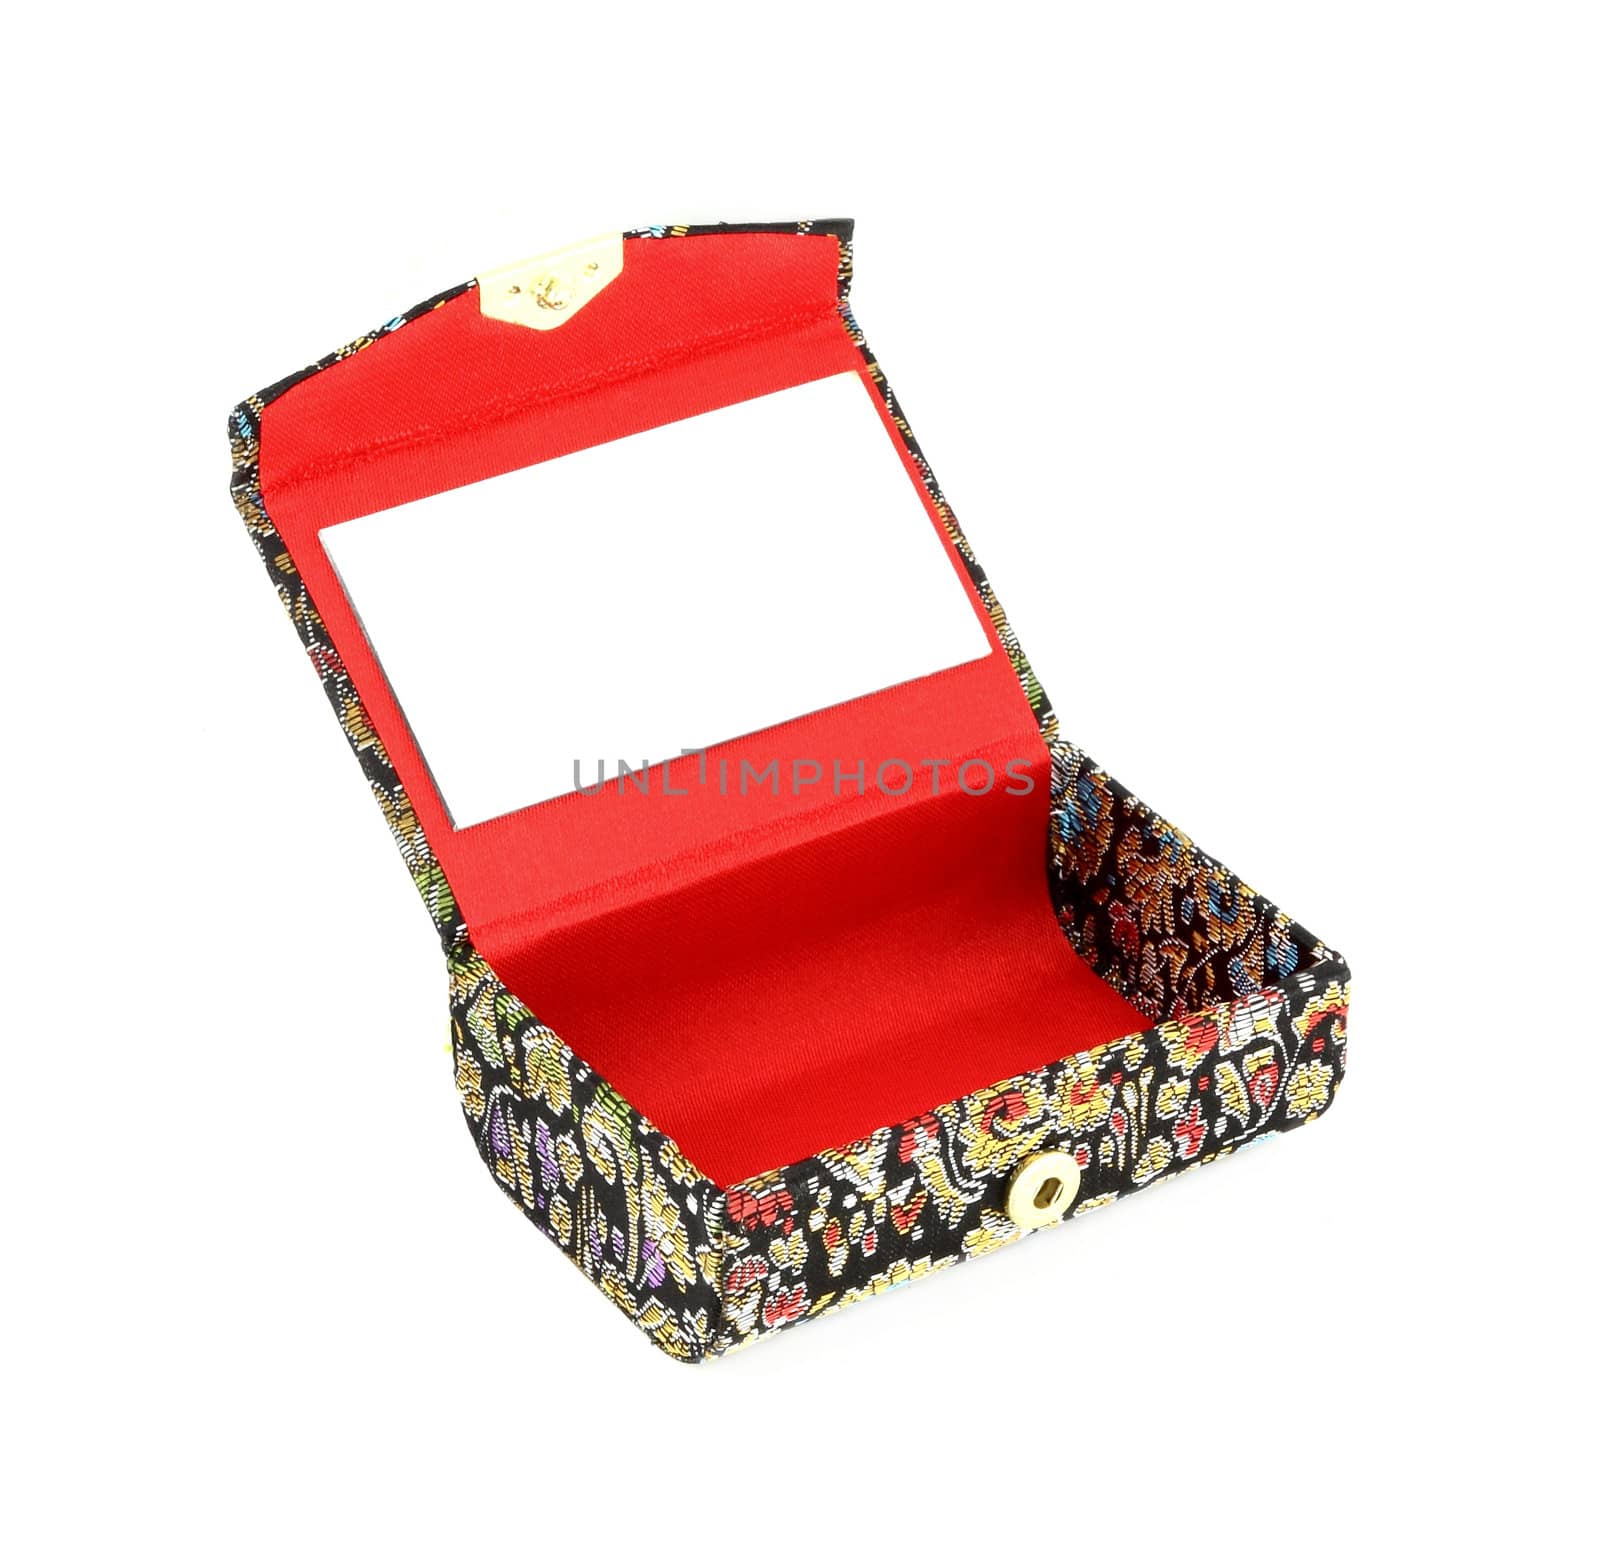 open small box with mirror inside by geargodz